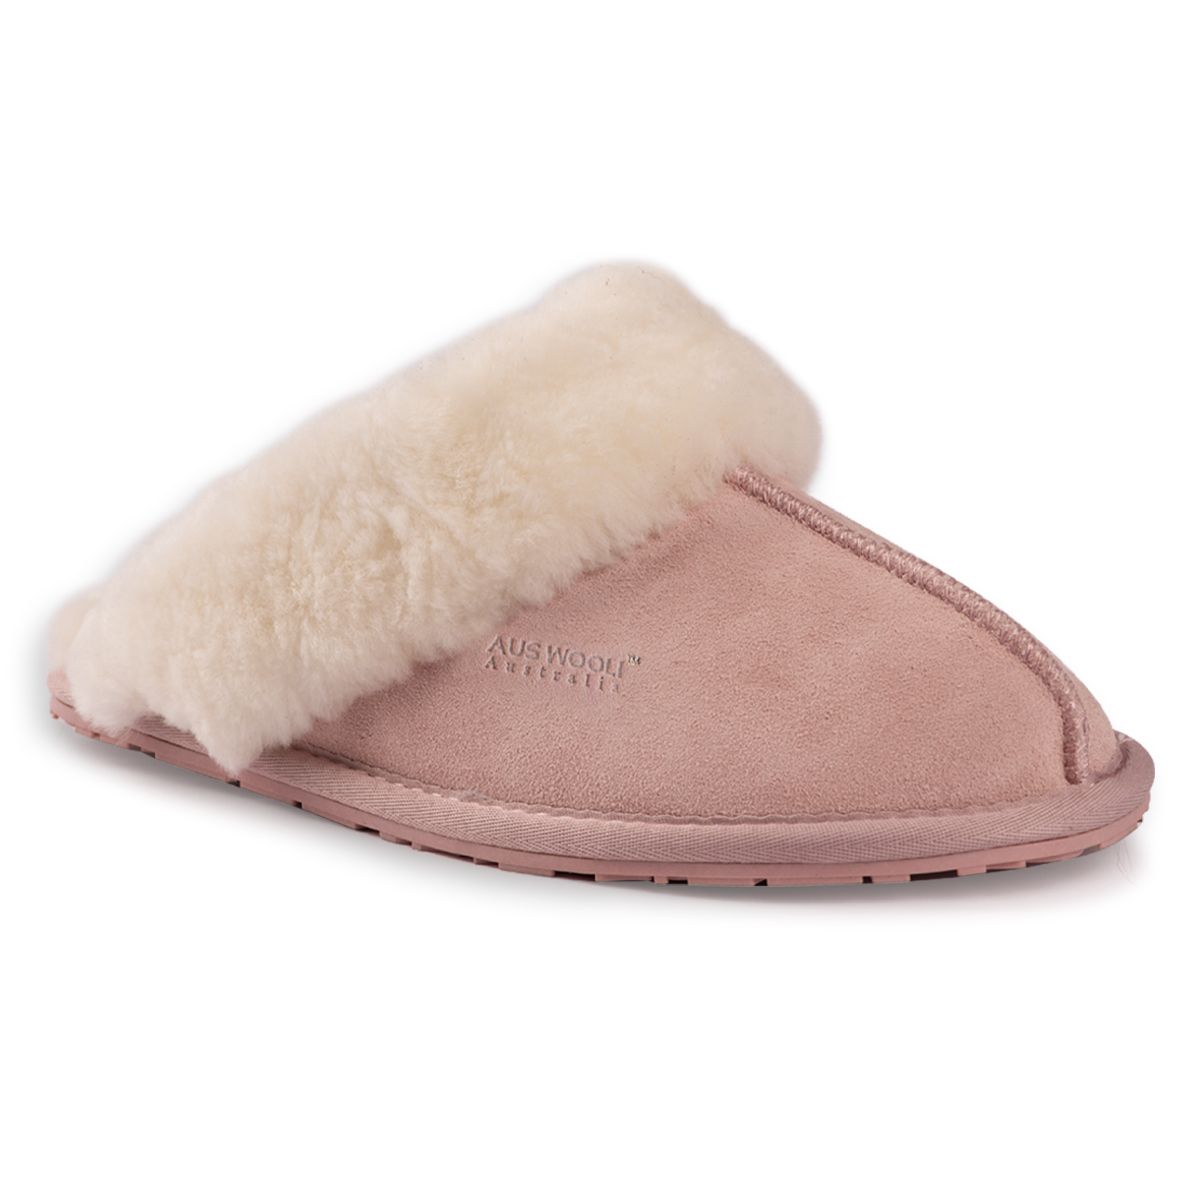 DETAILS





Extremely comfortable slip-on slipper

Soft premium genuine Australian Sheepskin wool lining
Full premium leather Suede upper with Australian sheepskin insole
Sustainably sourced and eco-friendly processed
Unisex sheepskin slipper – the perfect home accessory 
Soft Rubber outsole – highly durable and lightweight
Firm wool pelt for superior warmth
100% brand new and high quality, comes in a branded box, suitable for gifting